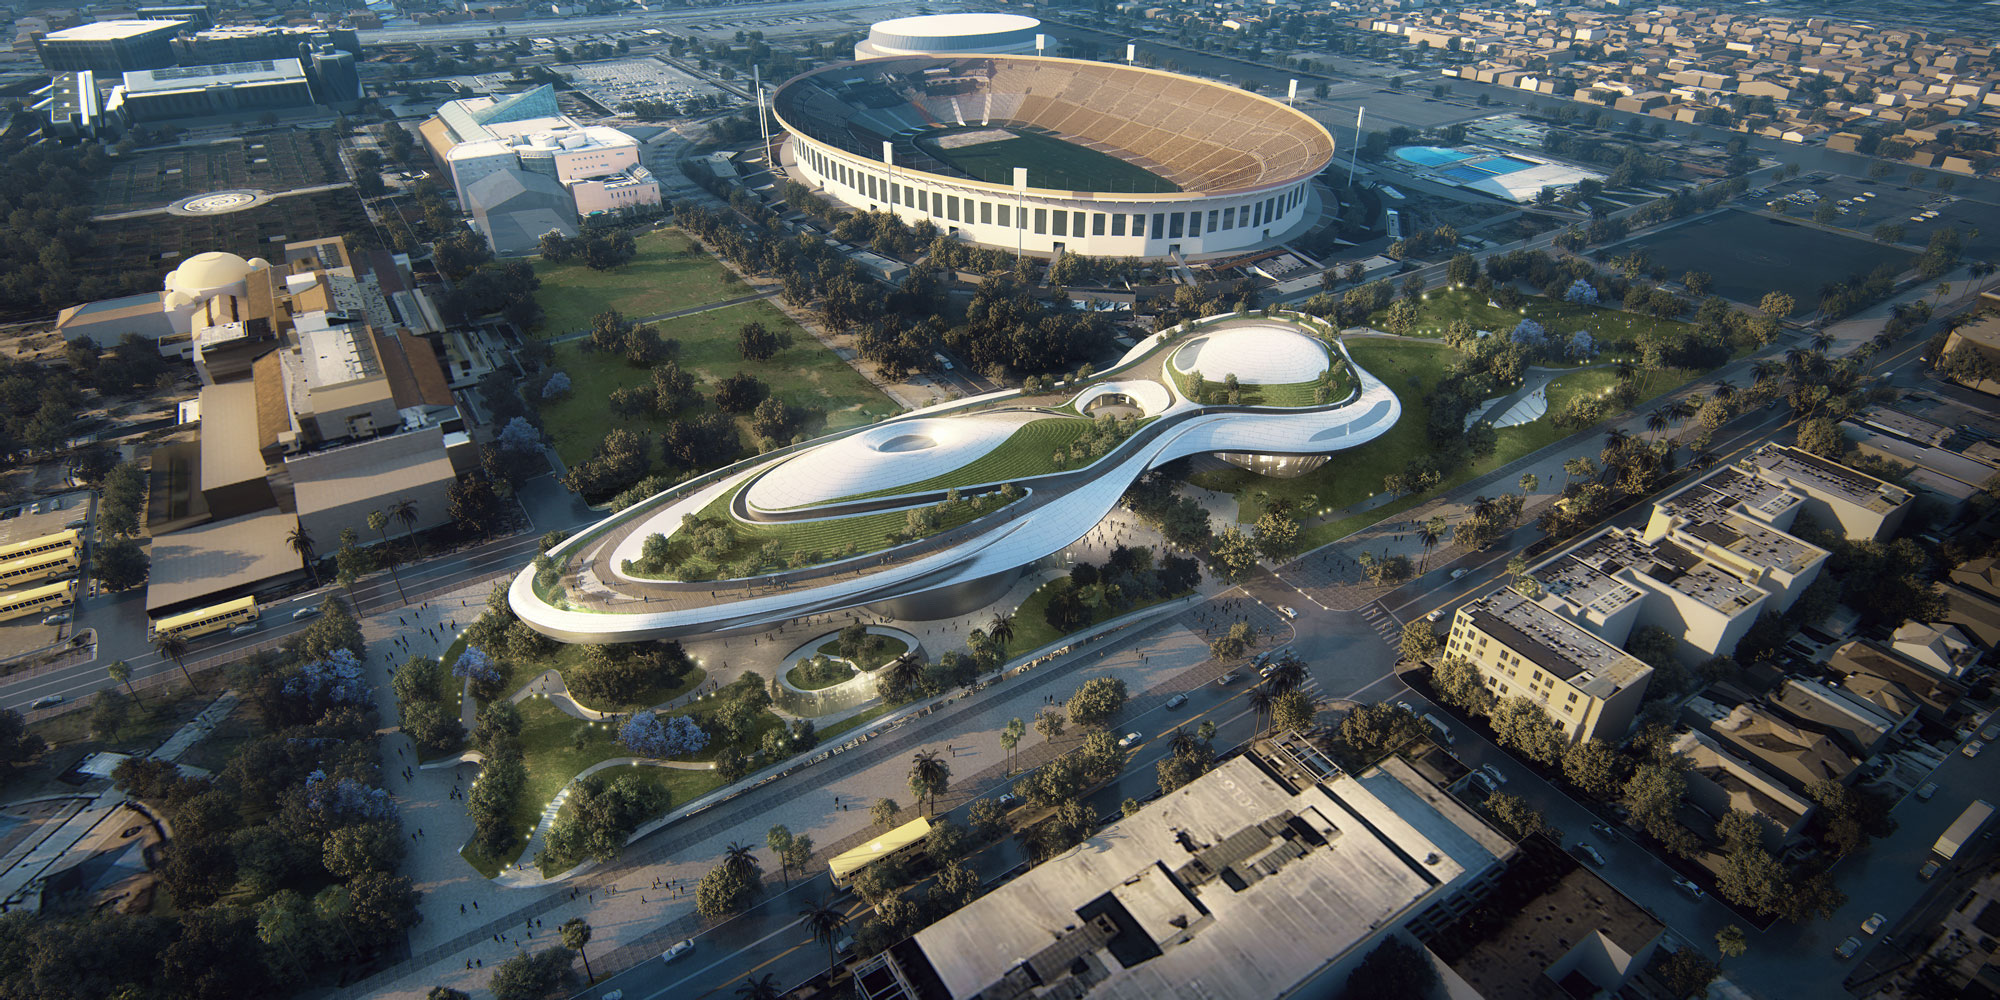 View from above of the Rendering of the Lucas Museum of Narrative Arts new museum to be built in Los Angeles. The Los Angles Coliseum is next to the new museum building.